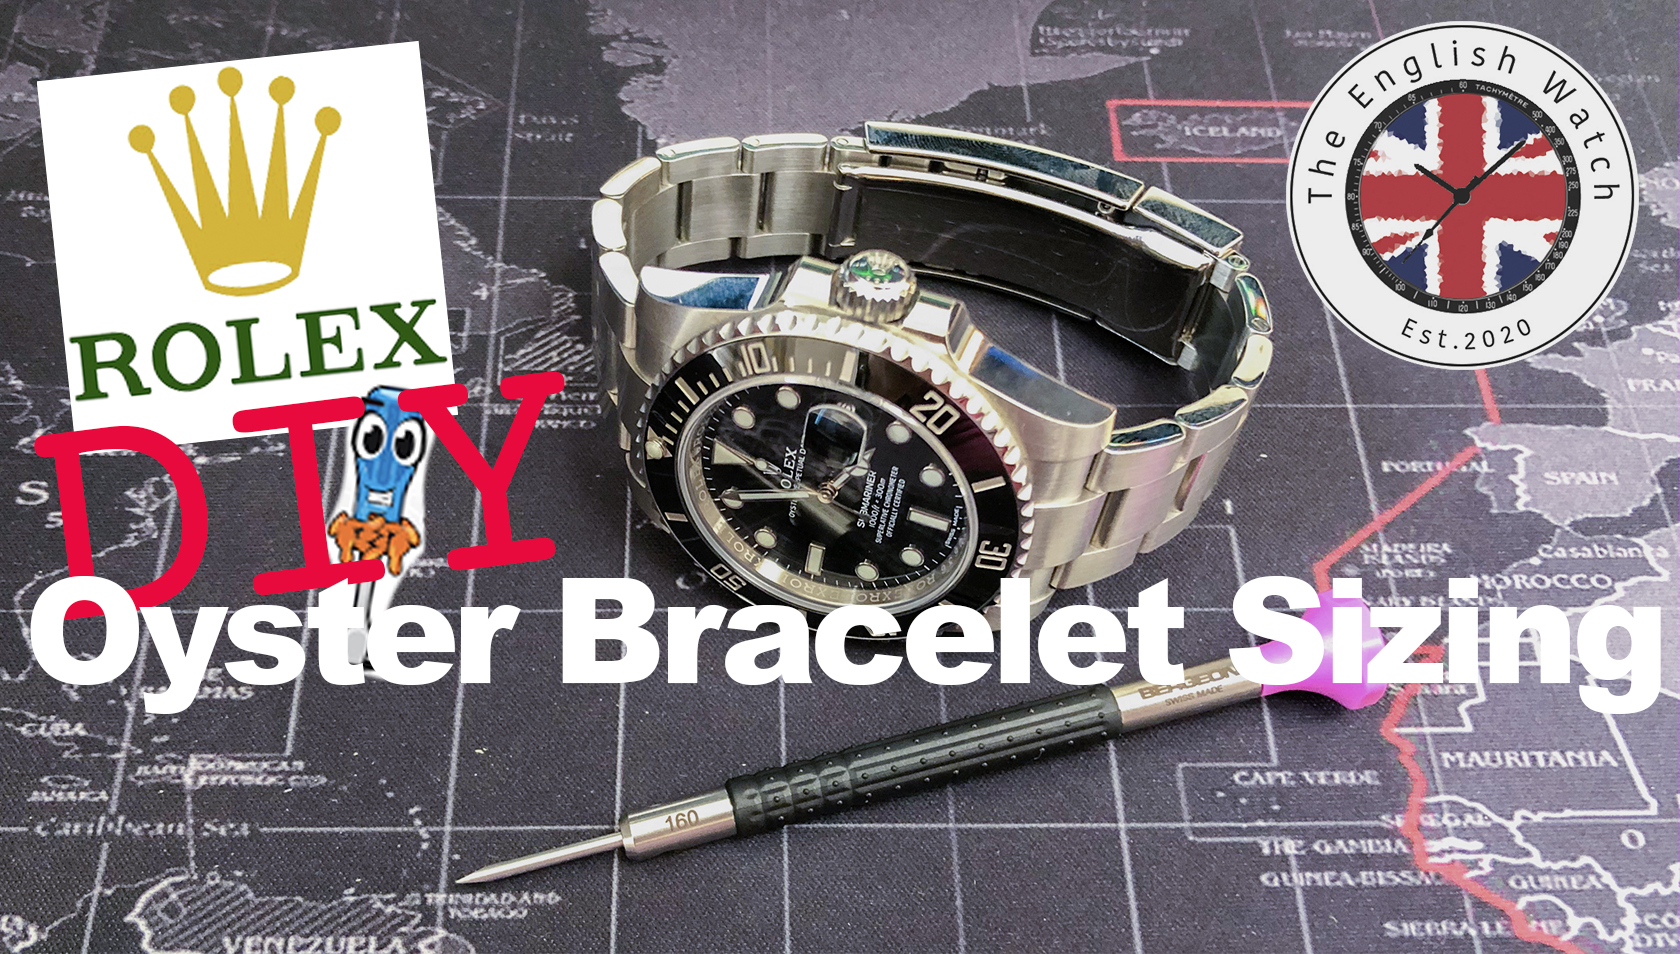 Do you center your clasp or blade when sizing your bracelet? - Rolex Forums  - Rolex Watch Forum